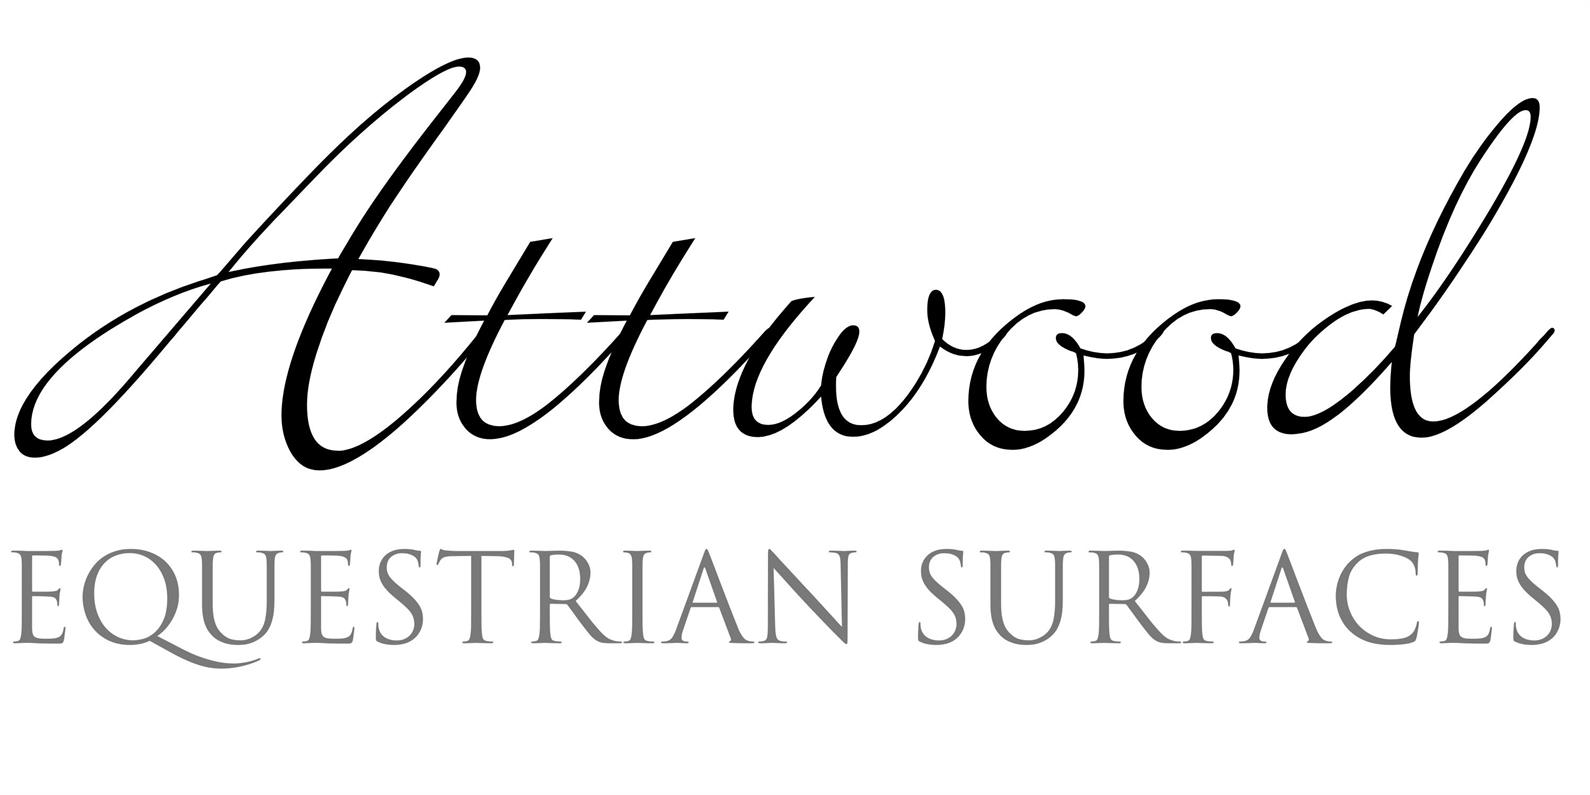 Attwood Equestrian Surfaces logo